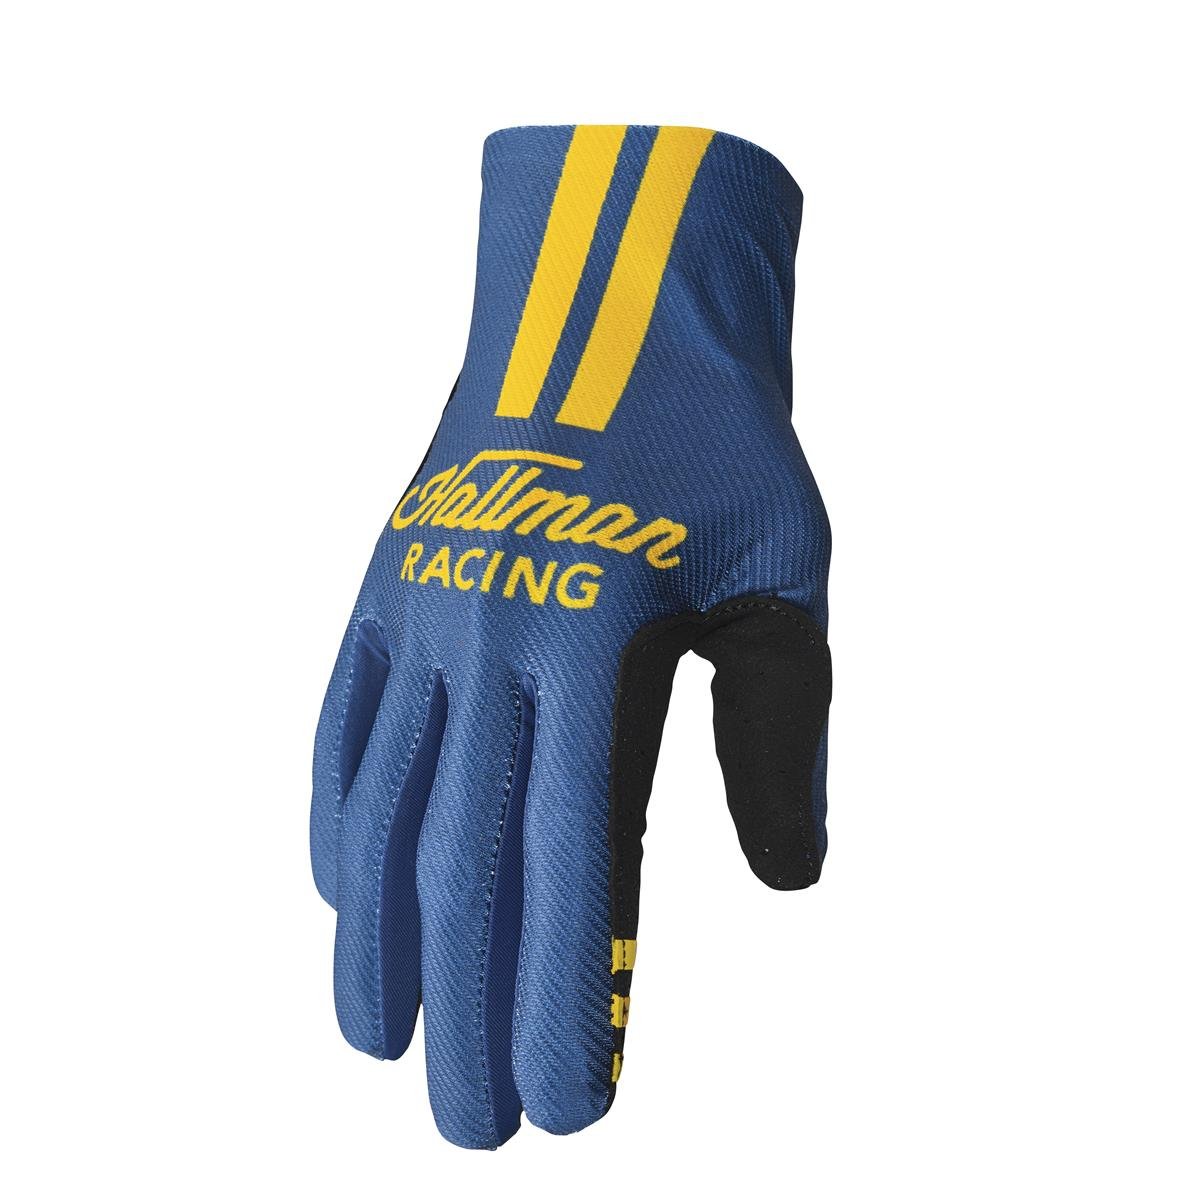 Thor Handschuhe Mainstay Roosted - Gelb/Navy Lemon